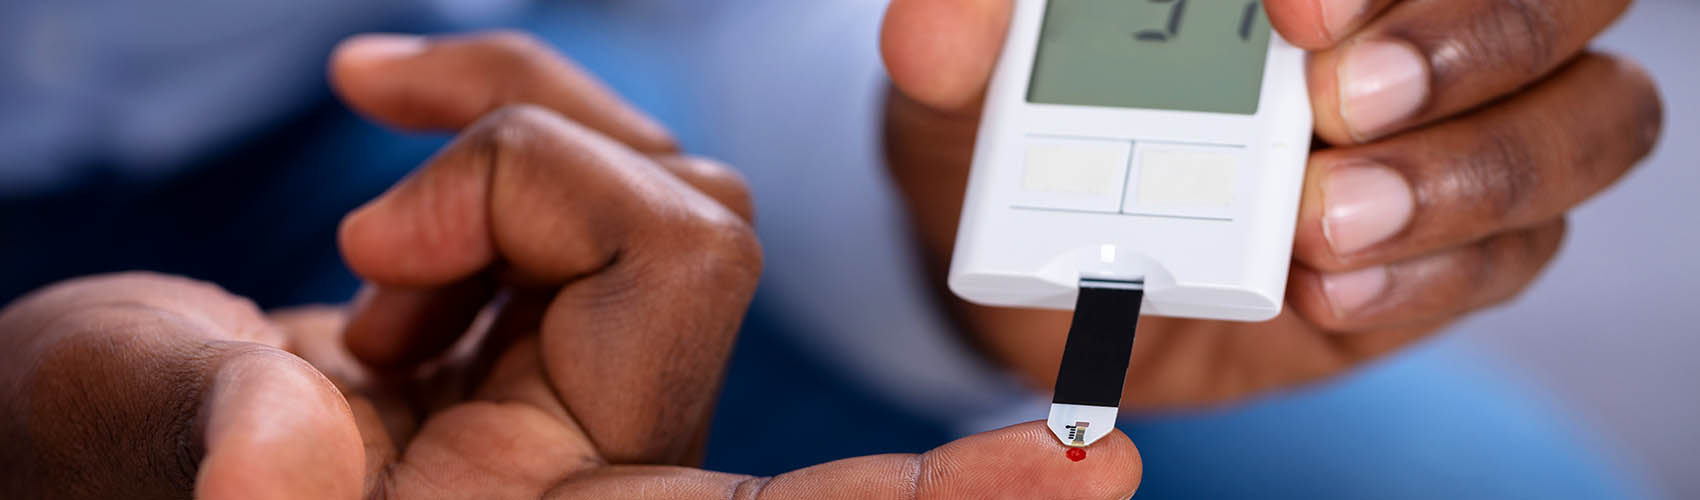 4 Diabetes Facts You May Not Know